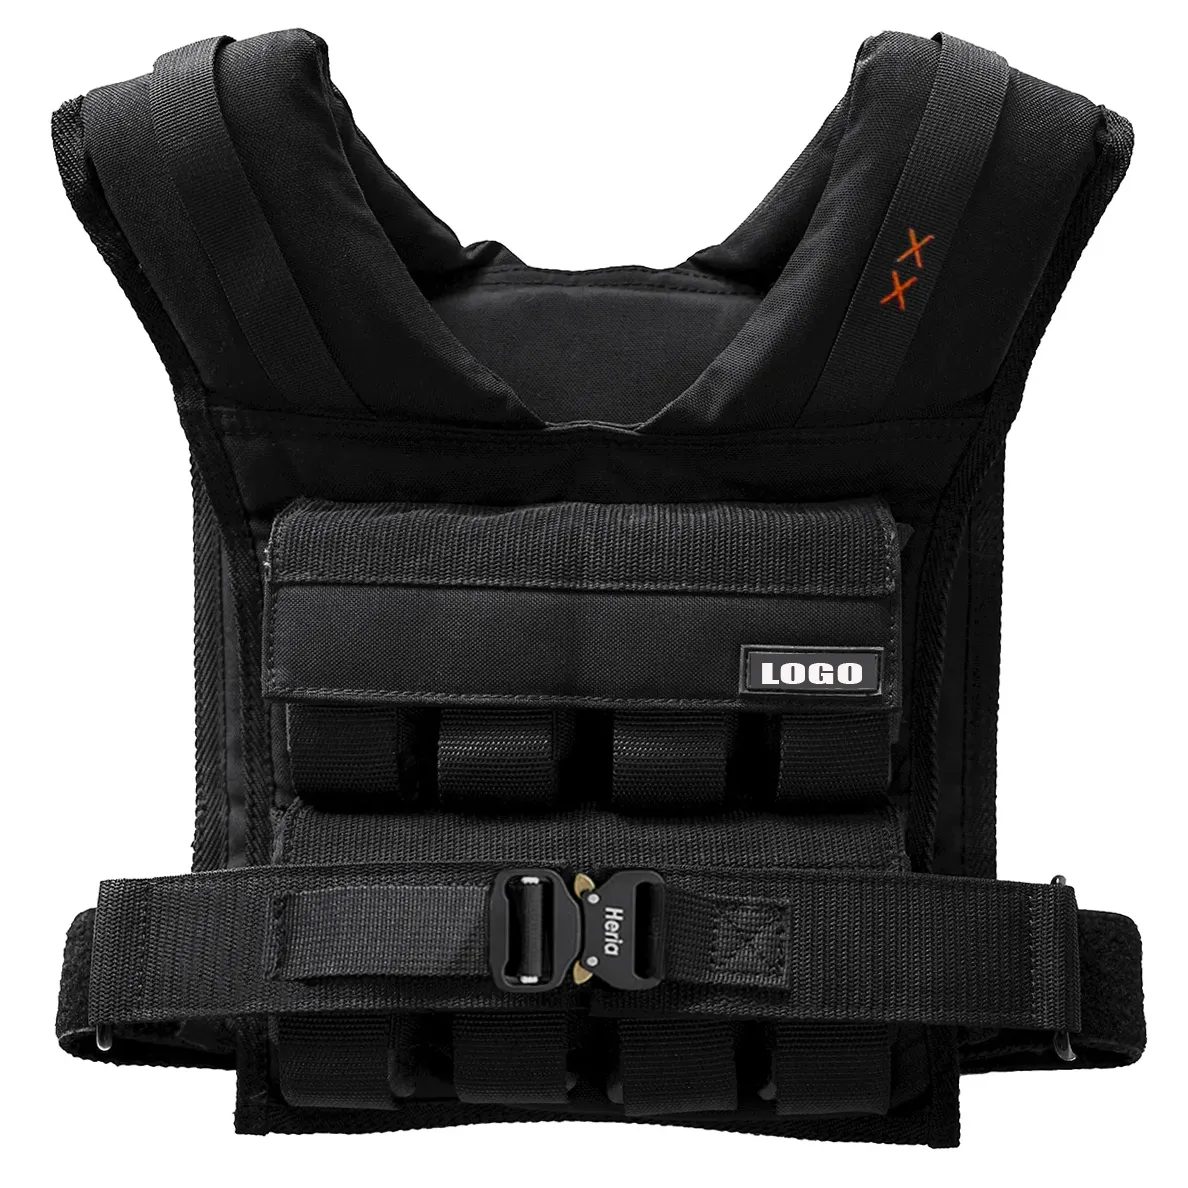 Customized Wholesale Strength Training Adjustable Weighted Vest Home Gym Fitness Accessories Tactical Training Weight Vest